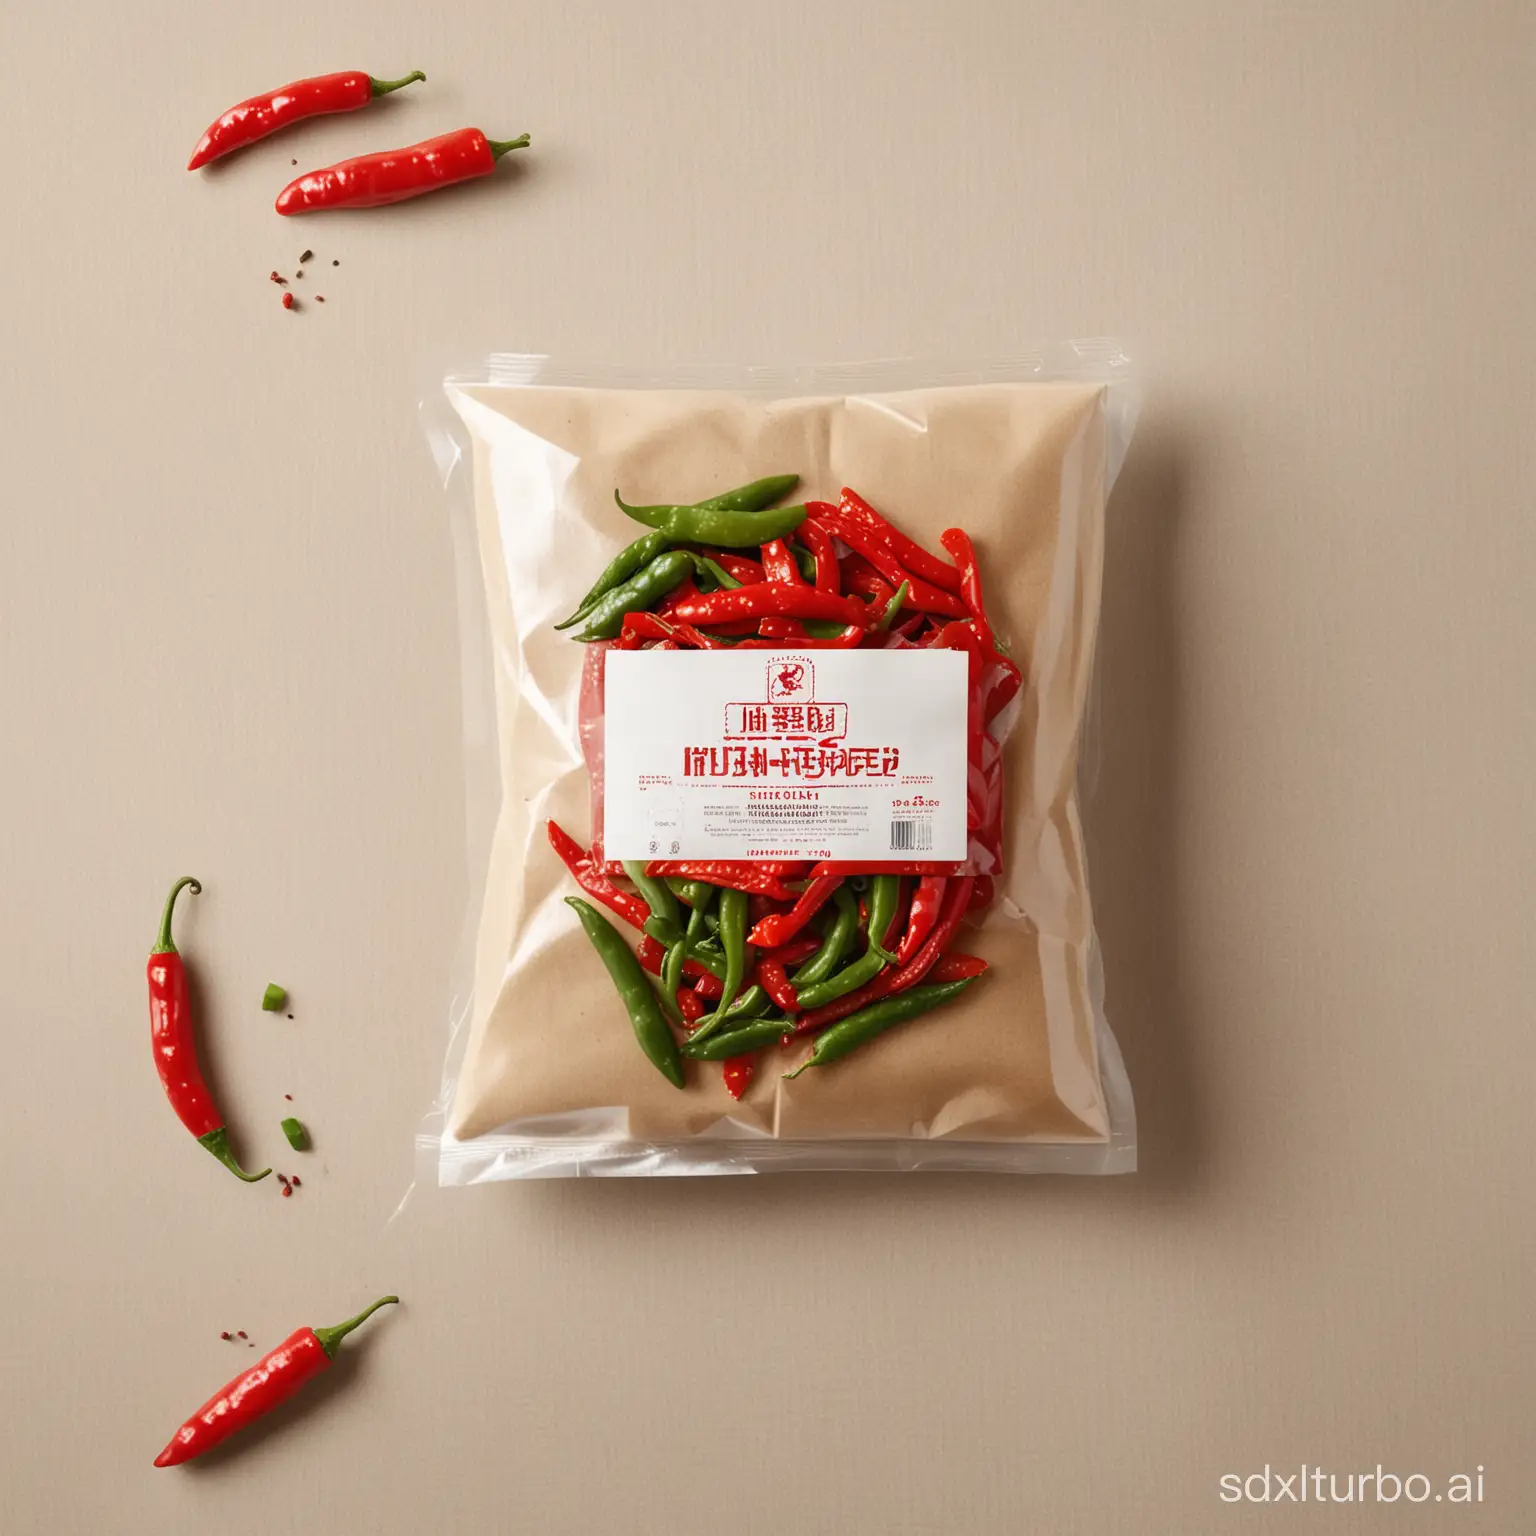 Packaging design, packaging bag, small crispy meat, wrapped flour products, fried food, broken red pepper, scattered green pepper, photography, table, tablecloth, small crispy meat in the packaging bagPackaging design, packaging bag, small crispy meat, wrapped flour products, fried food, broken red pepper, scattered green pepper, photography, table, tablecloth, small crispy meat in the packaging bag